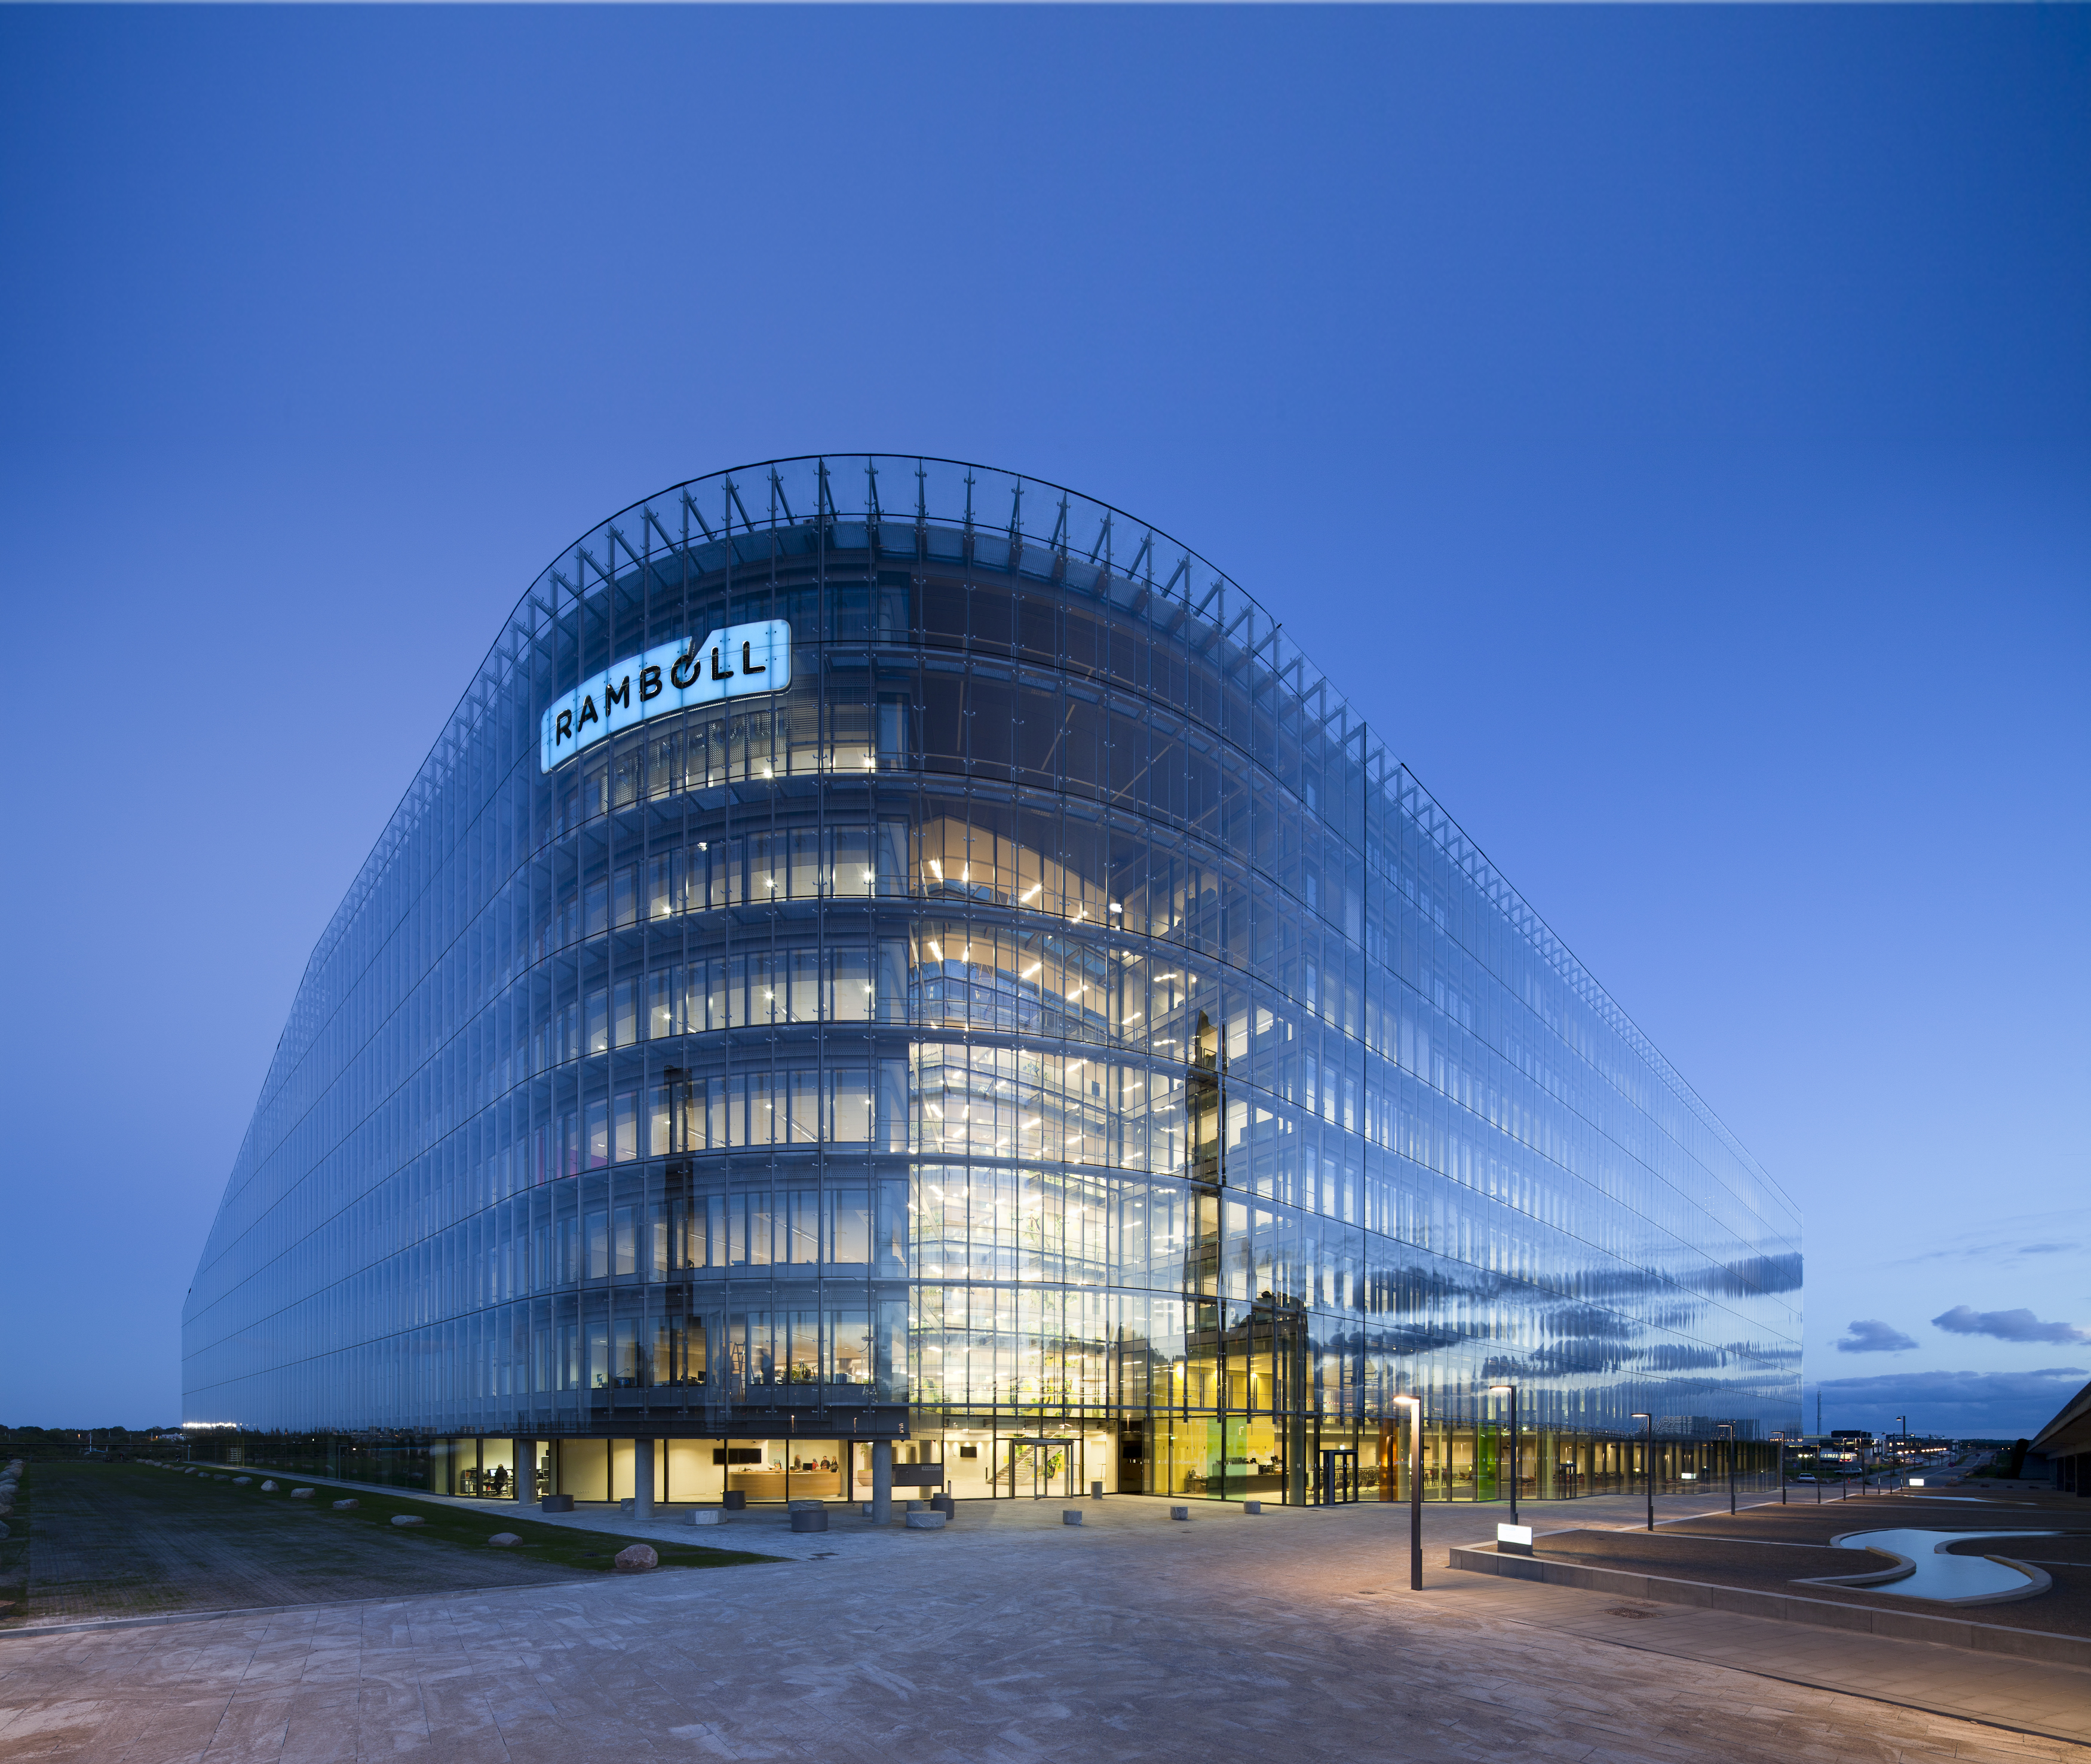 Photo of Ramboll Head Office by MIKKELSEN Architects. Photo Credit: MIKKELSEN Architects